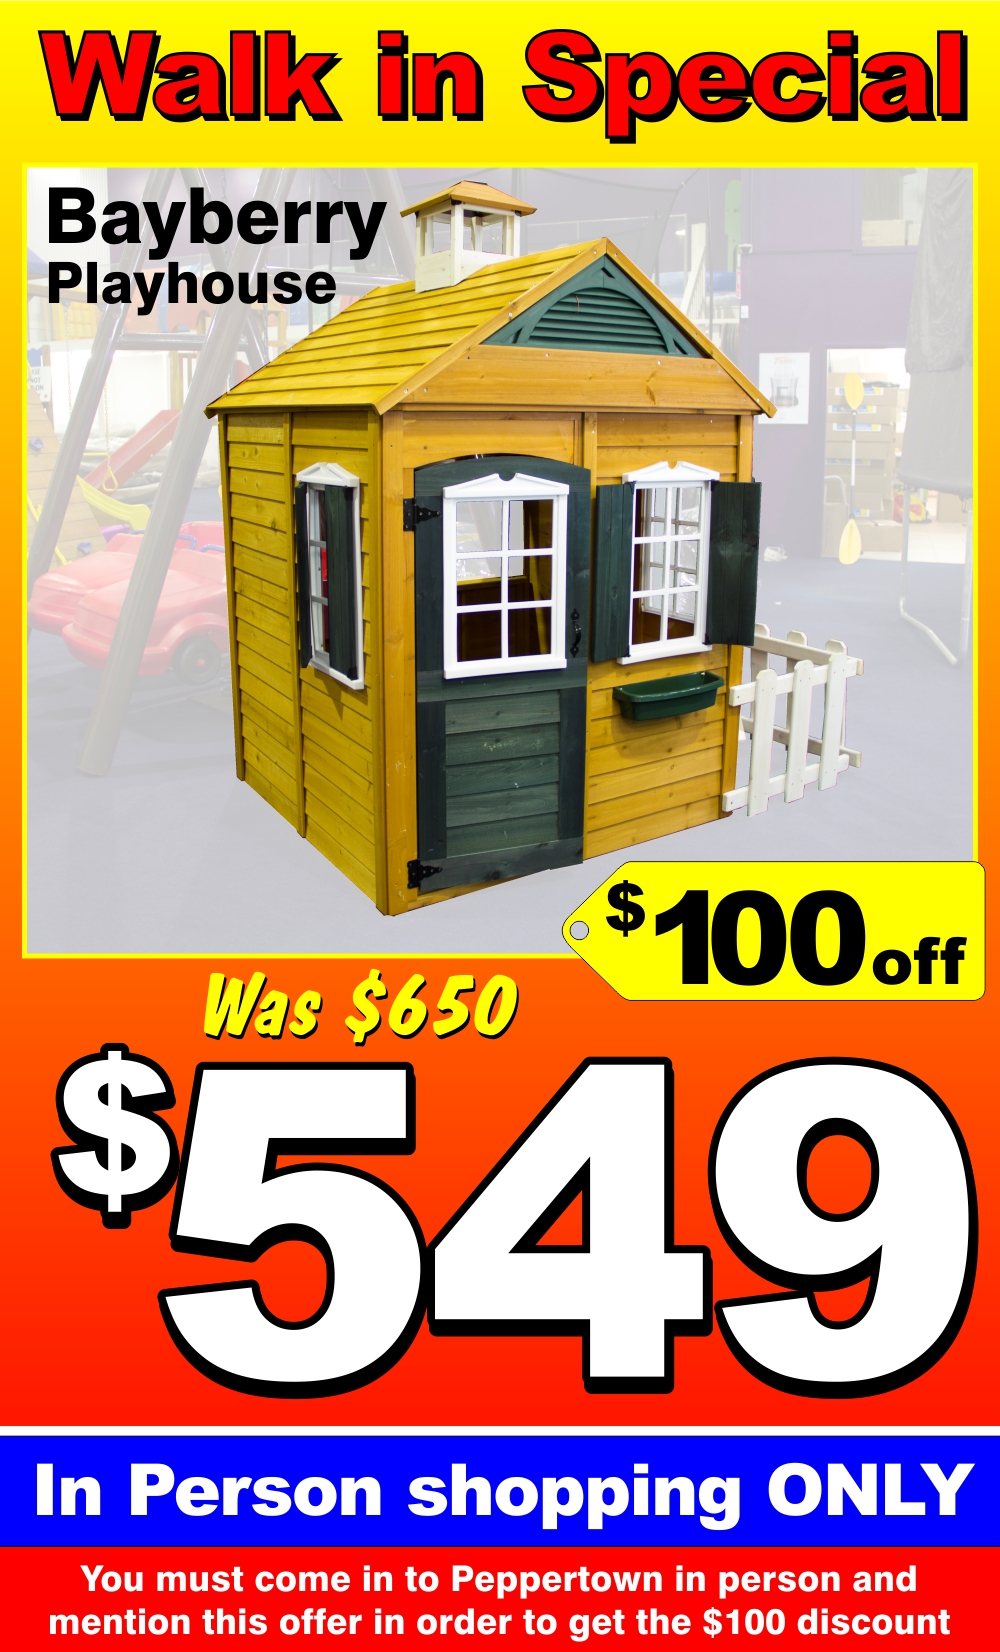 peppertown specials Bayberry Playhouse $100 off